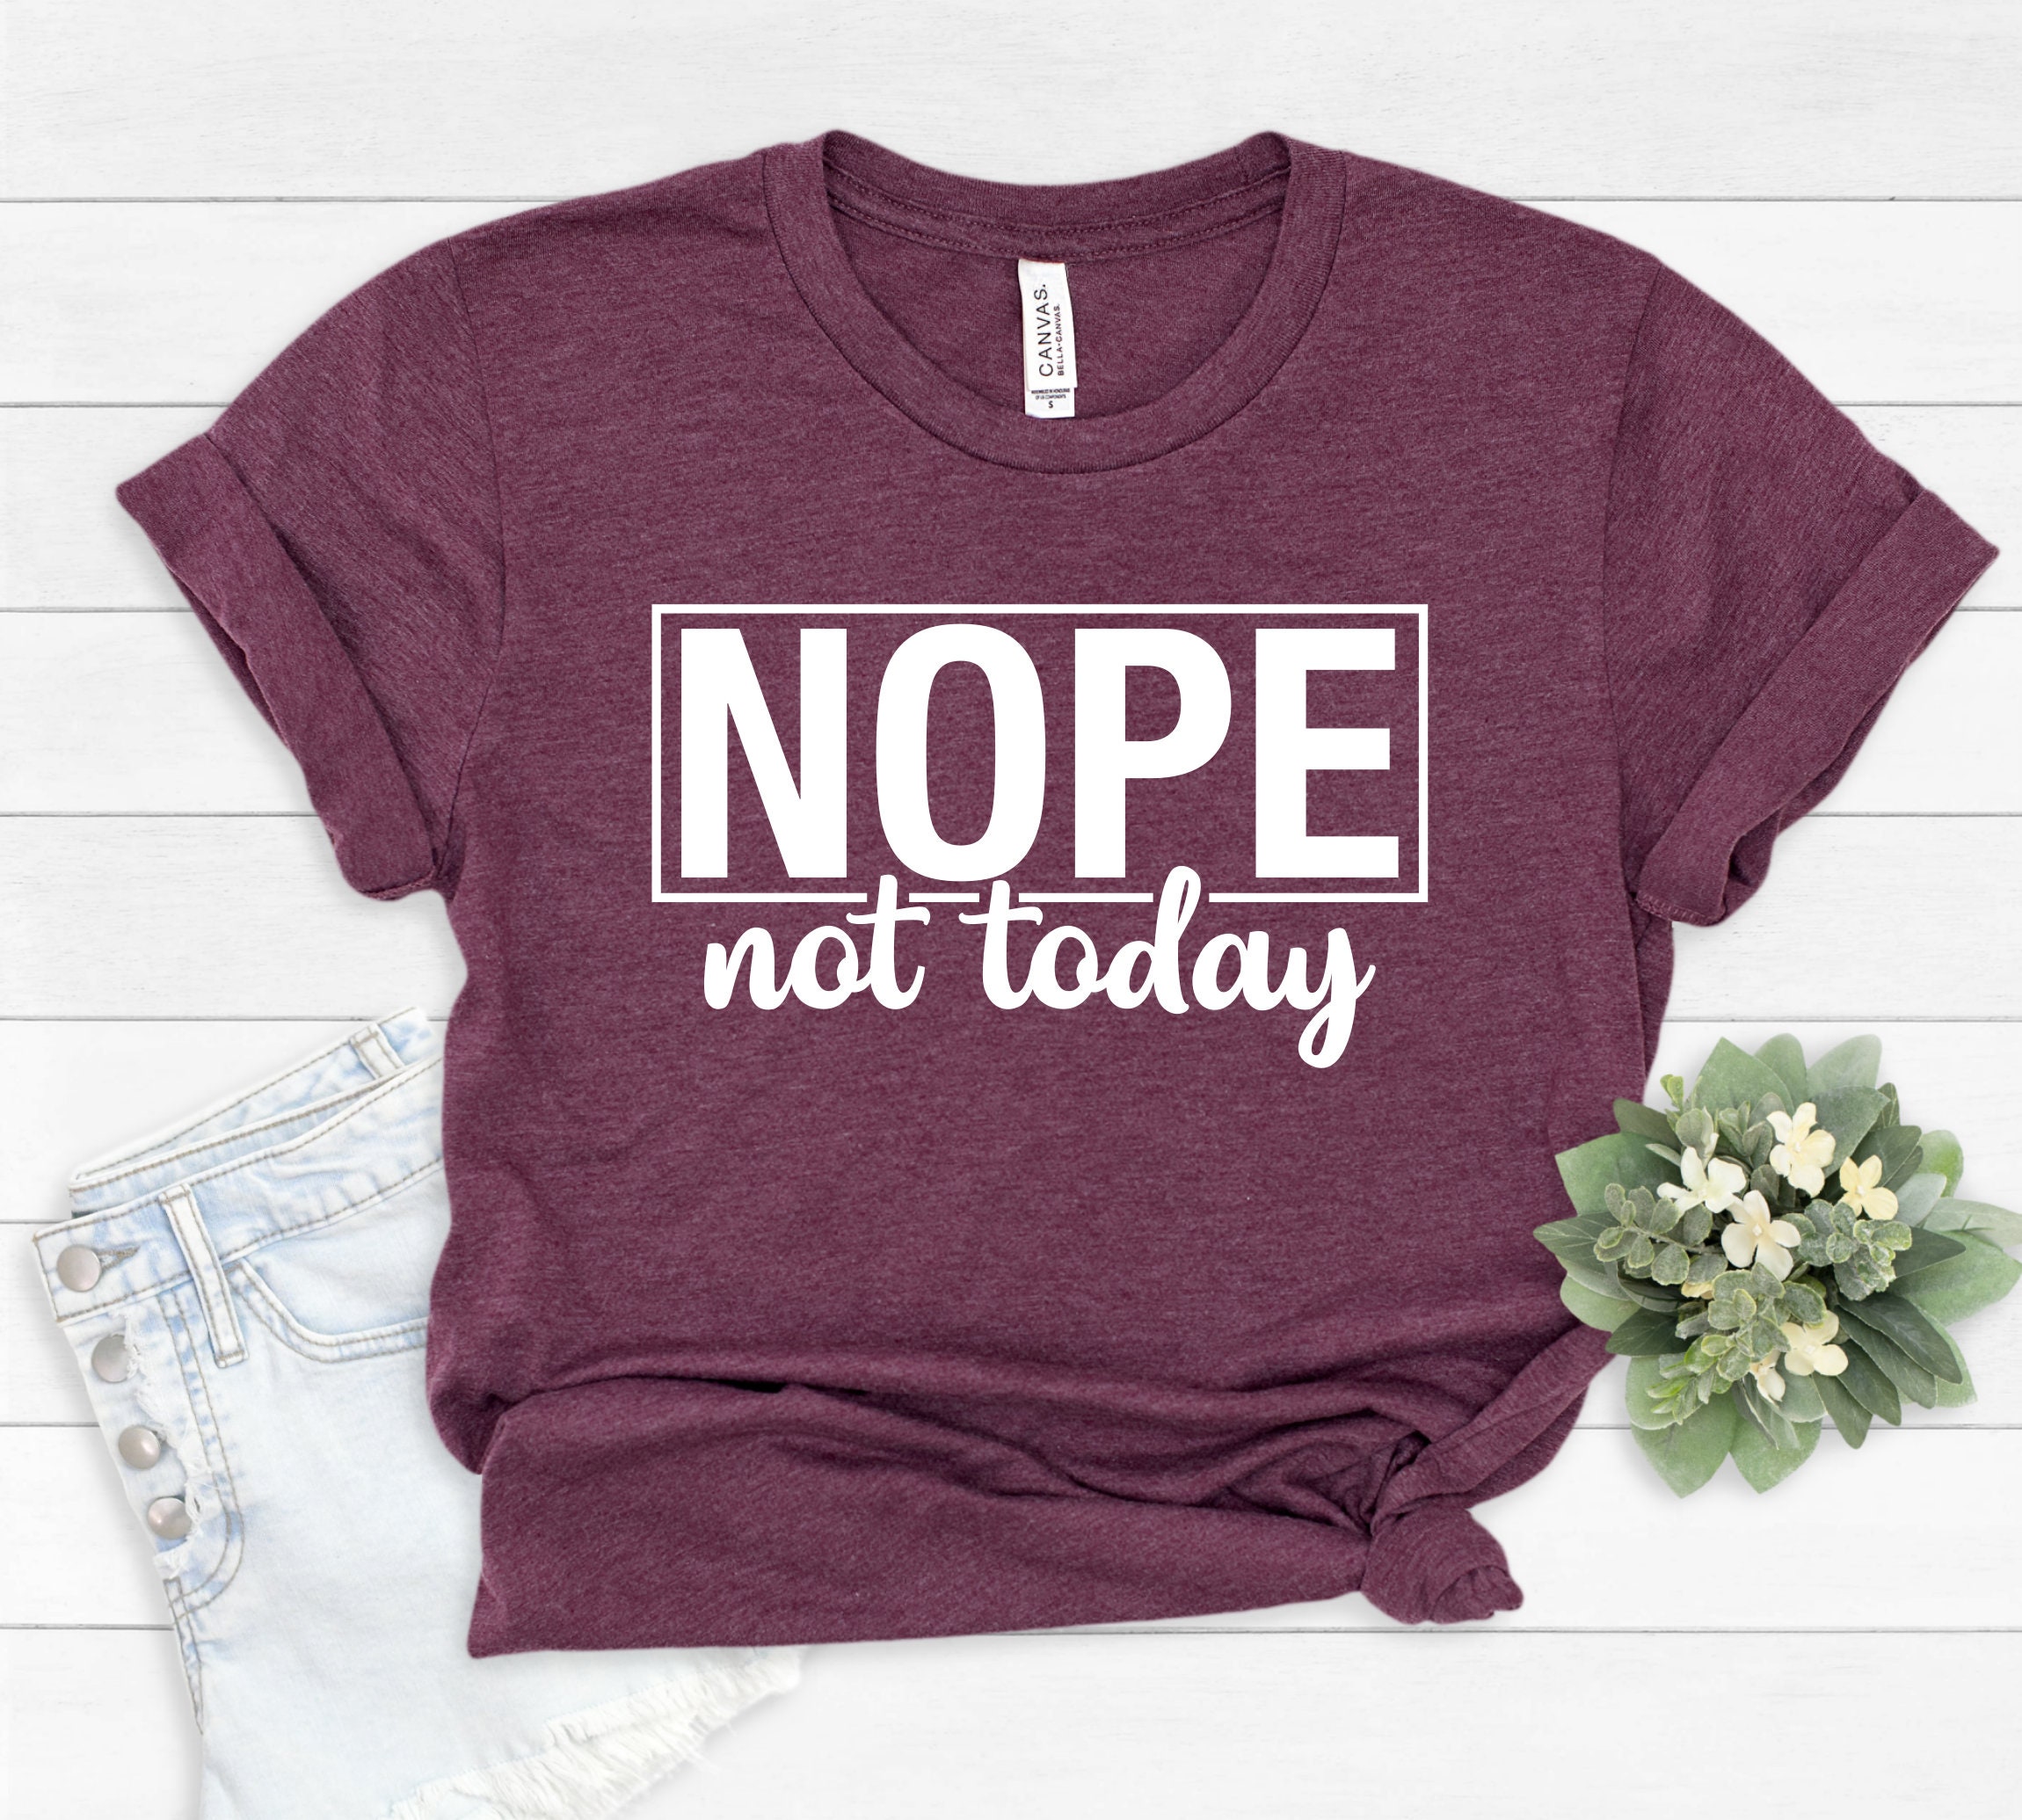 Not Shirt Etsy Nope - Today